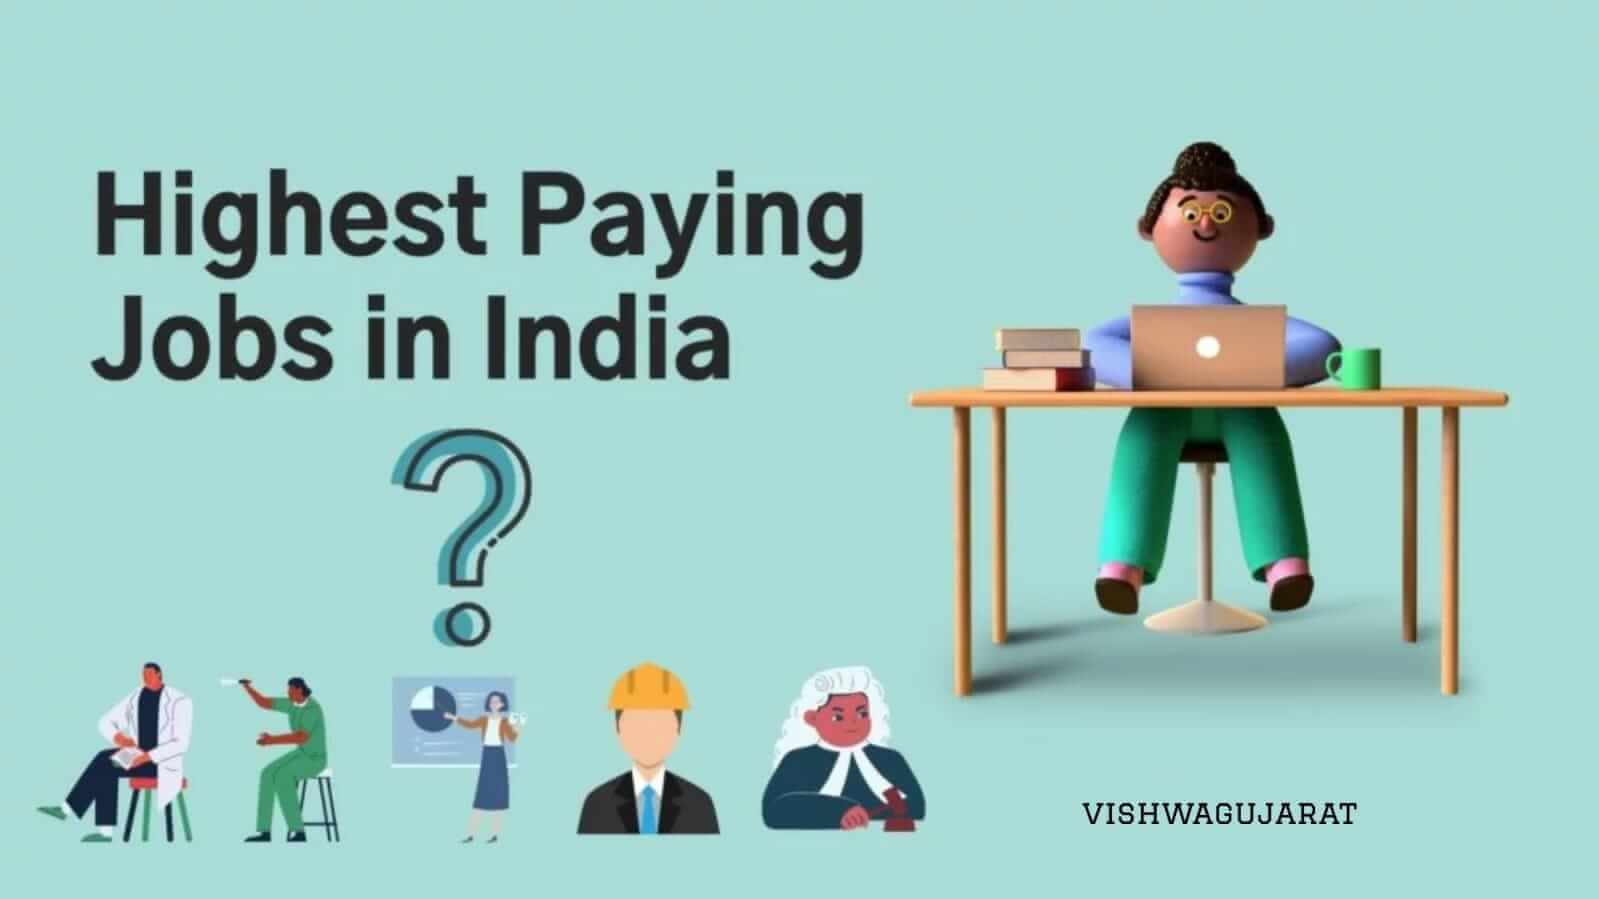 Top 15+ Highest Paying Jobs in India 2022: Check Top Paying Careers